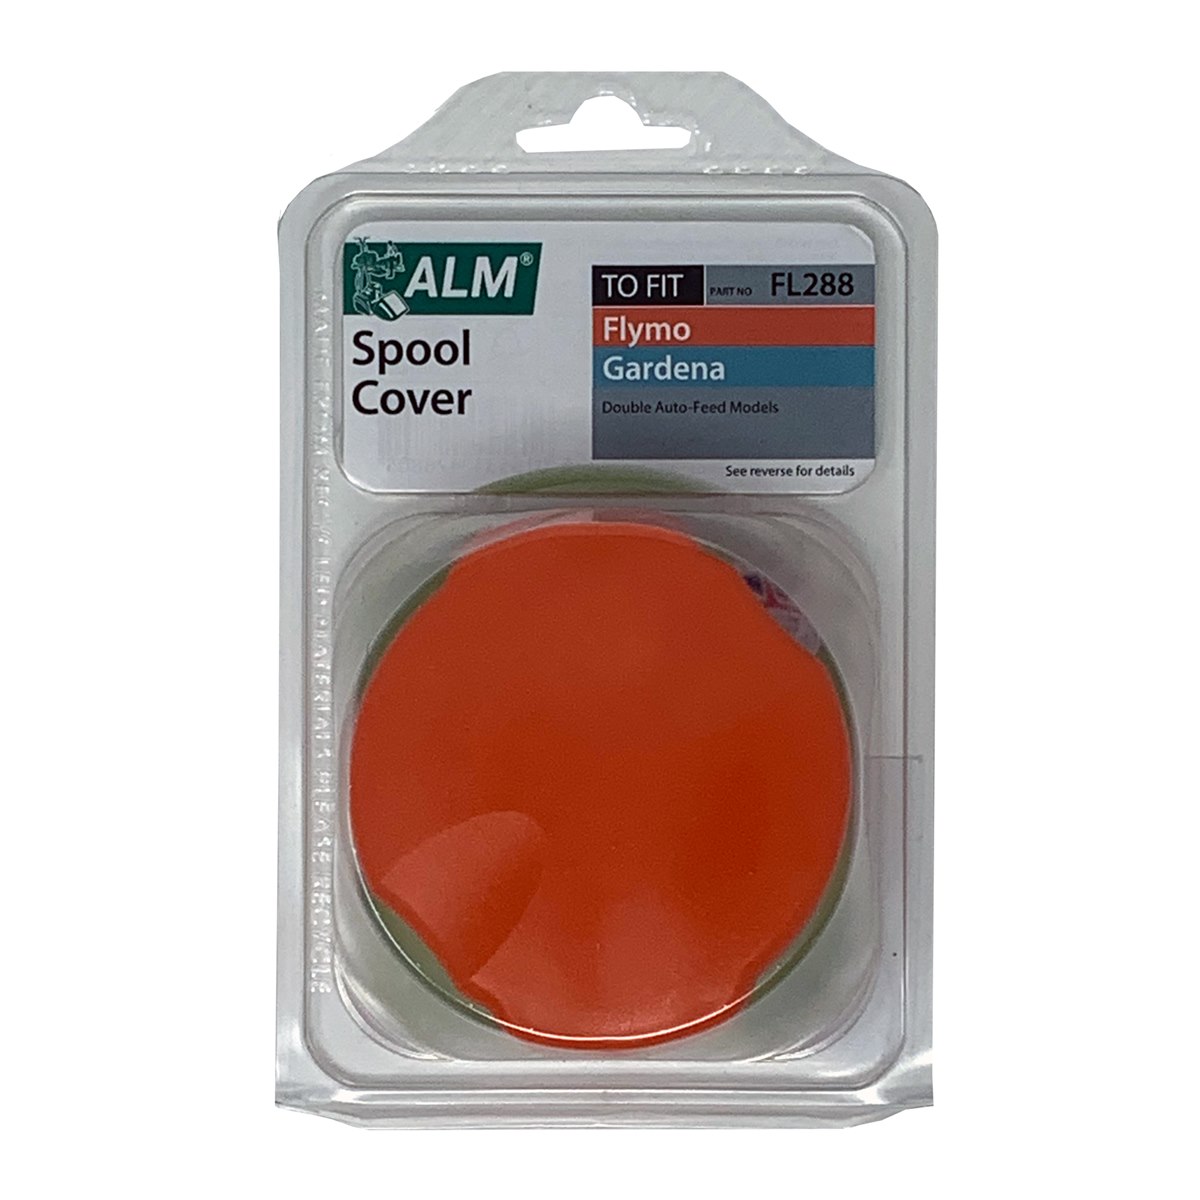 ALM FL288 Spool Cover For Flymo and Gardena Double Auto Feed Models